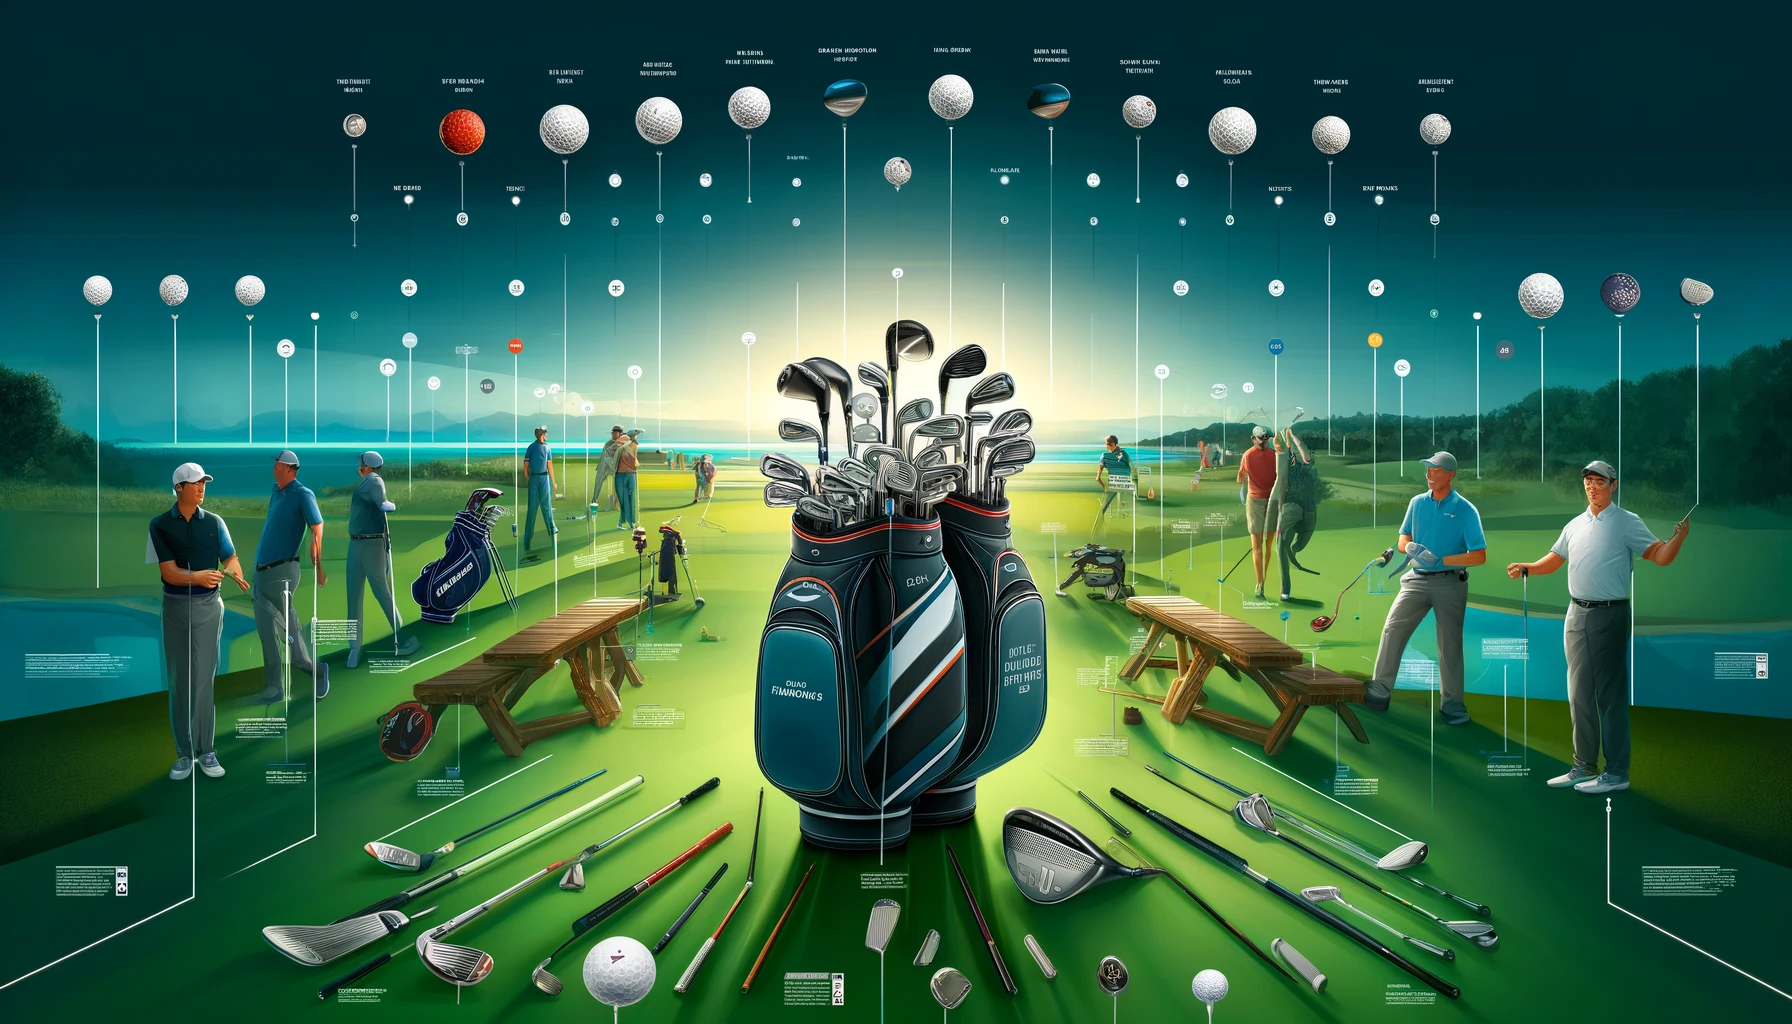 Golf Equipment Used by Famous Golfers